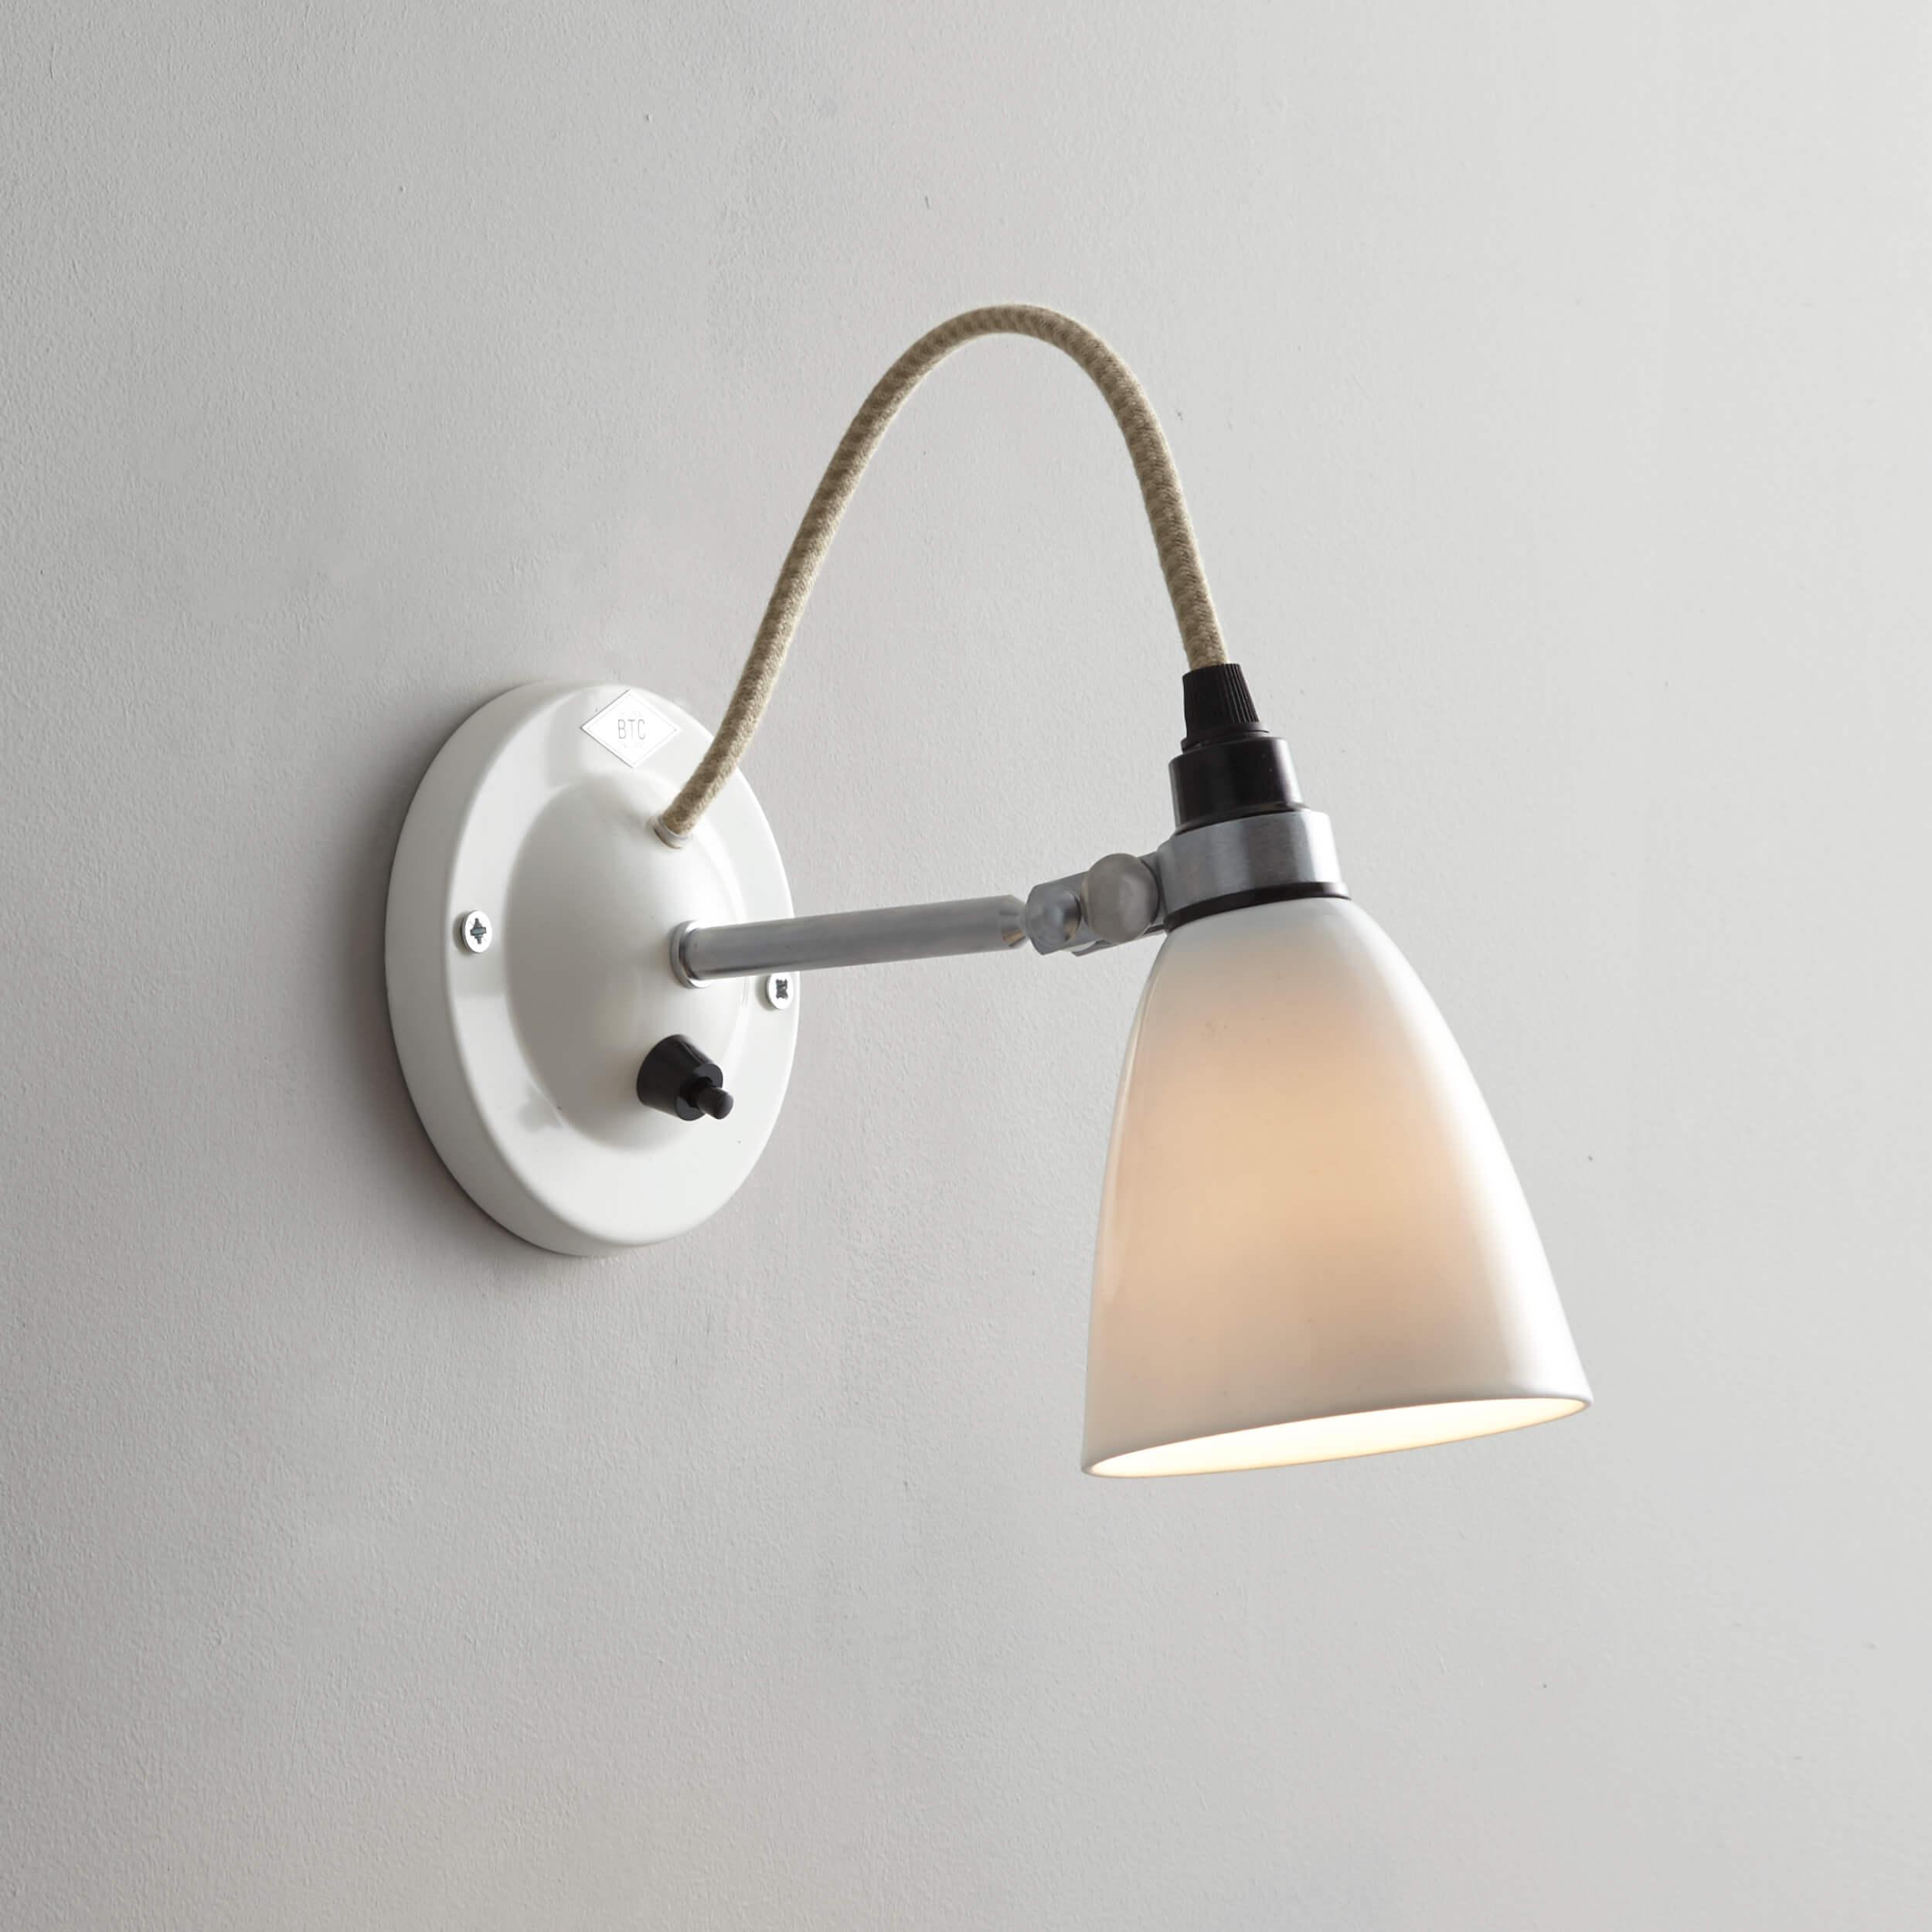 Original BTC - Hector Switched Small Dome Wall Light - US-FW396N | Montreal Lighting & Hardware